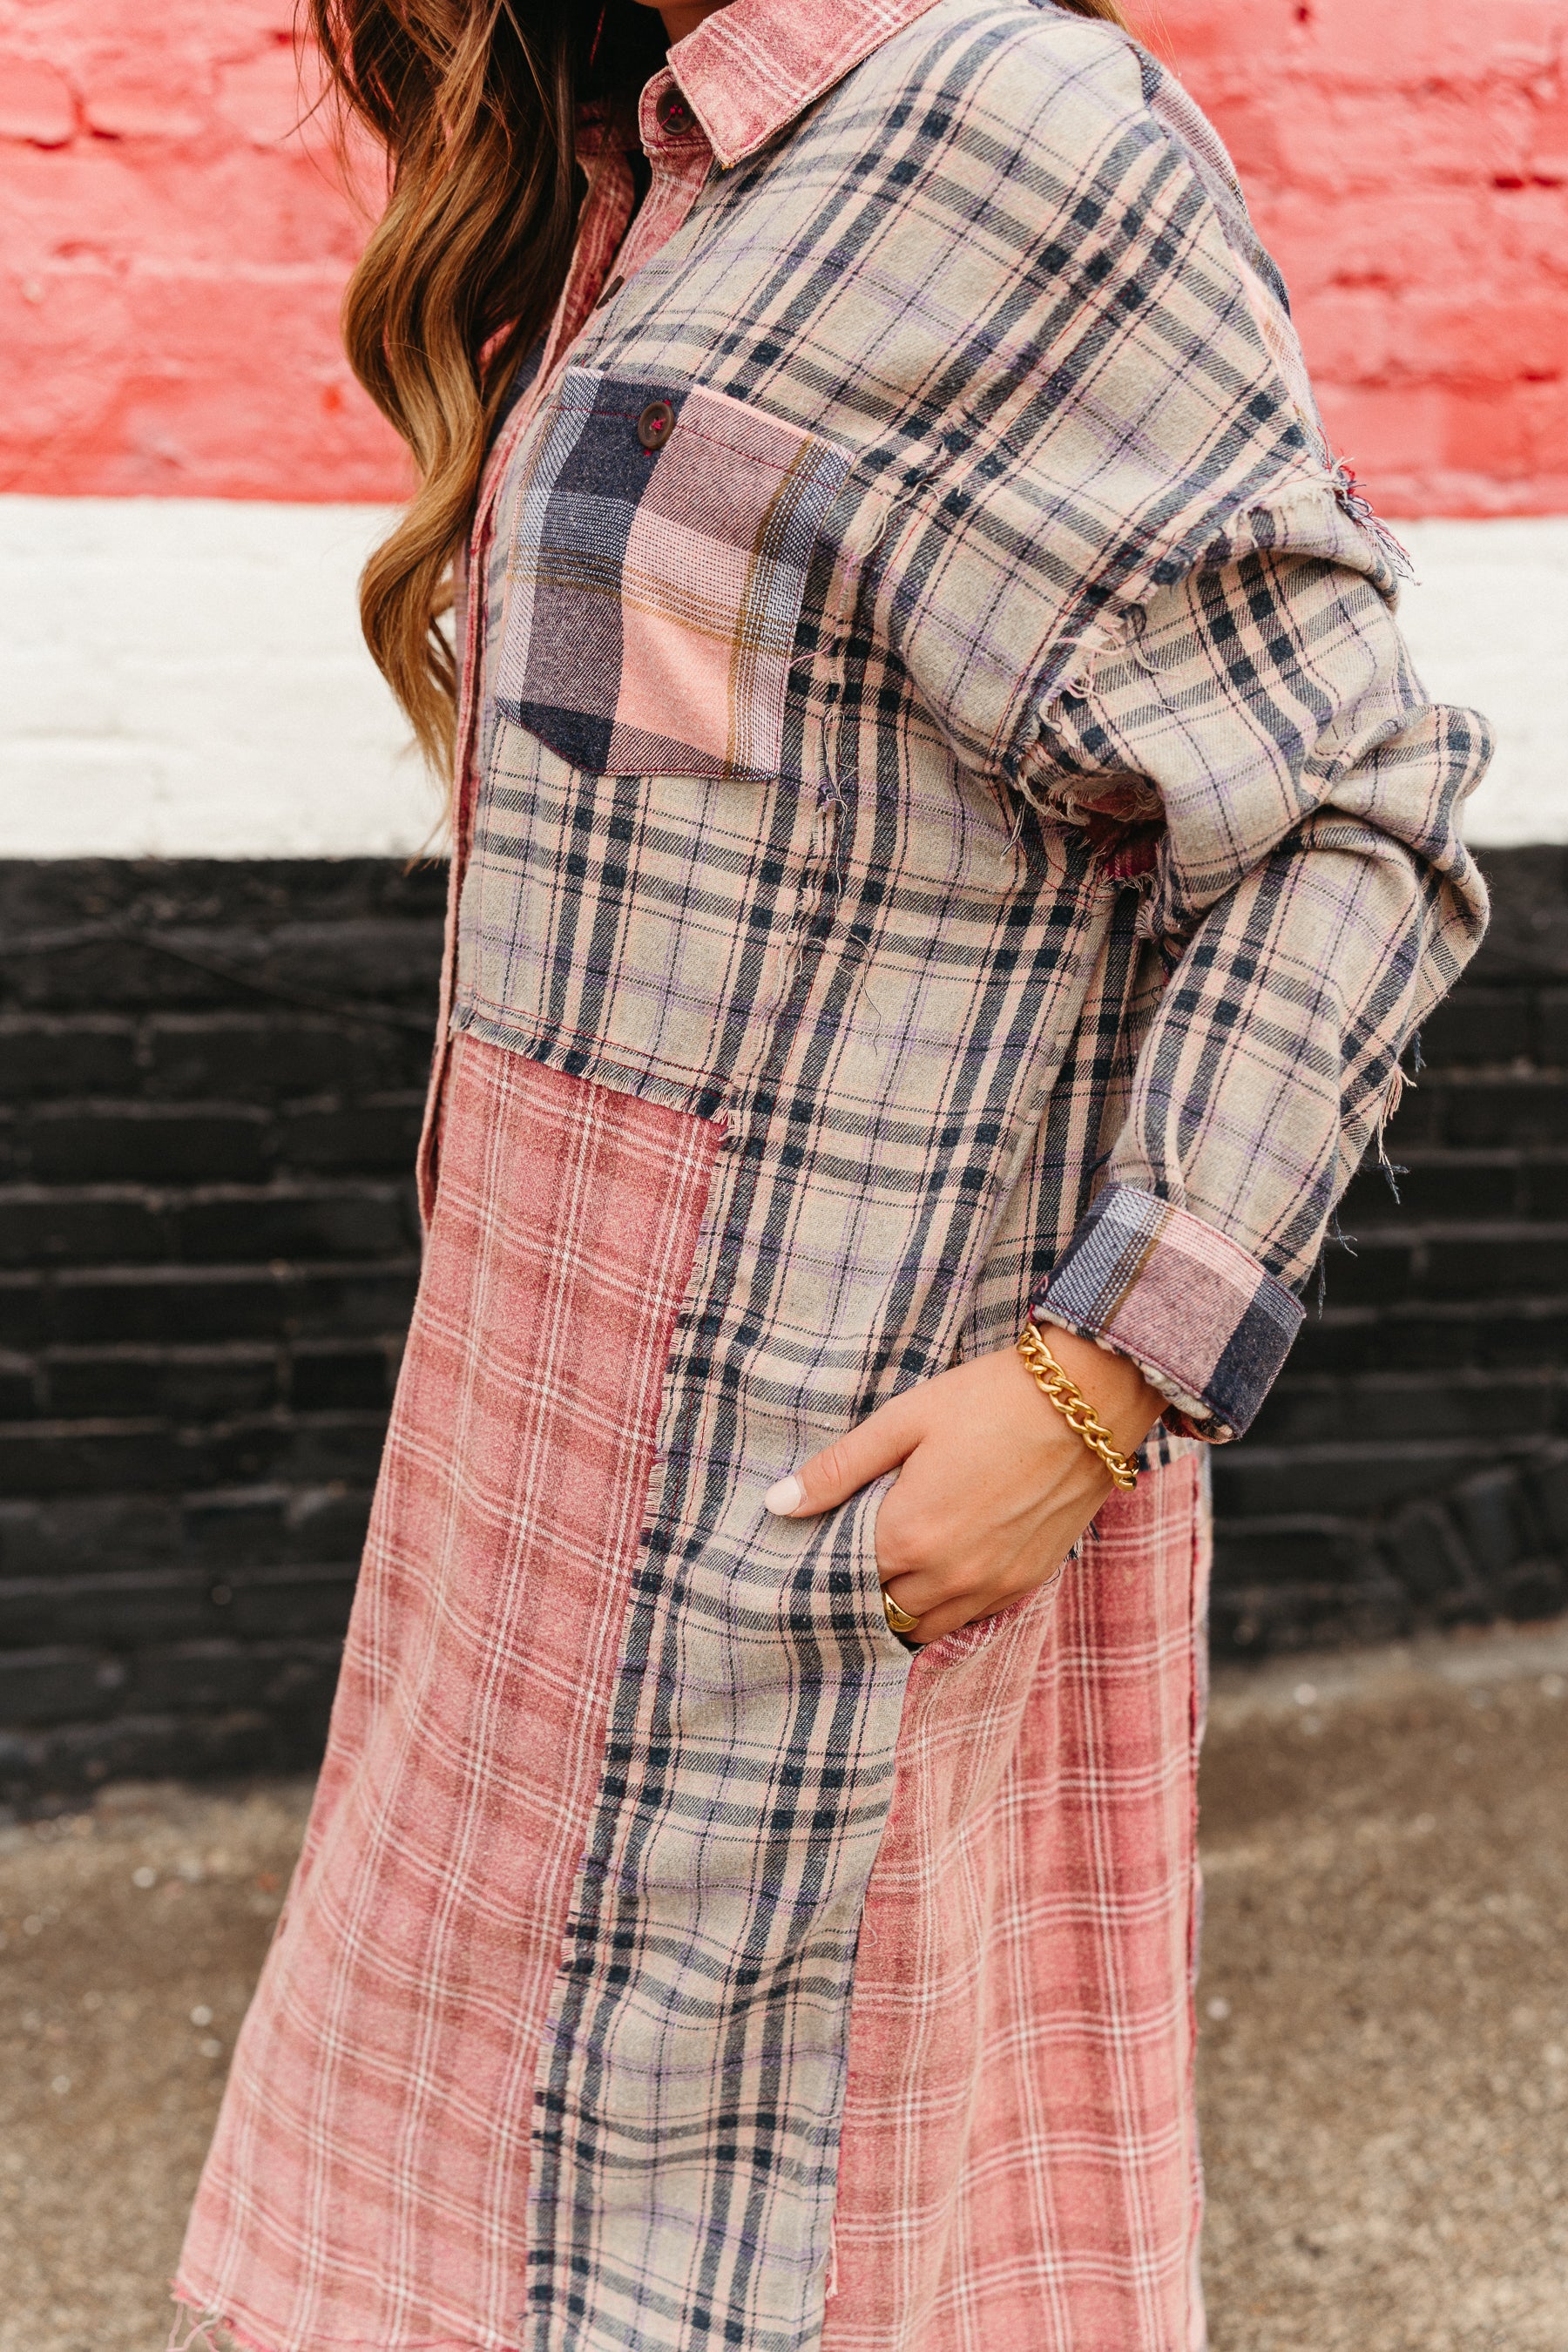 All About It Plaid Shirt